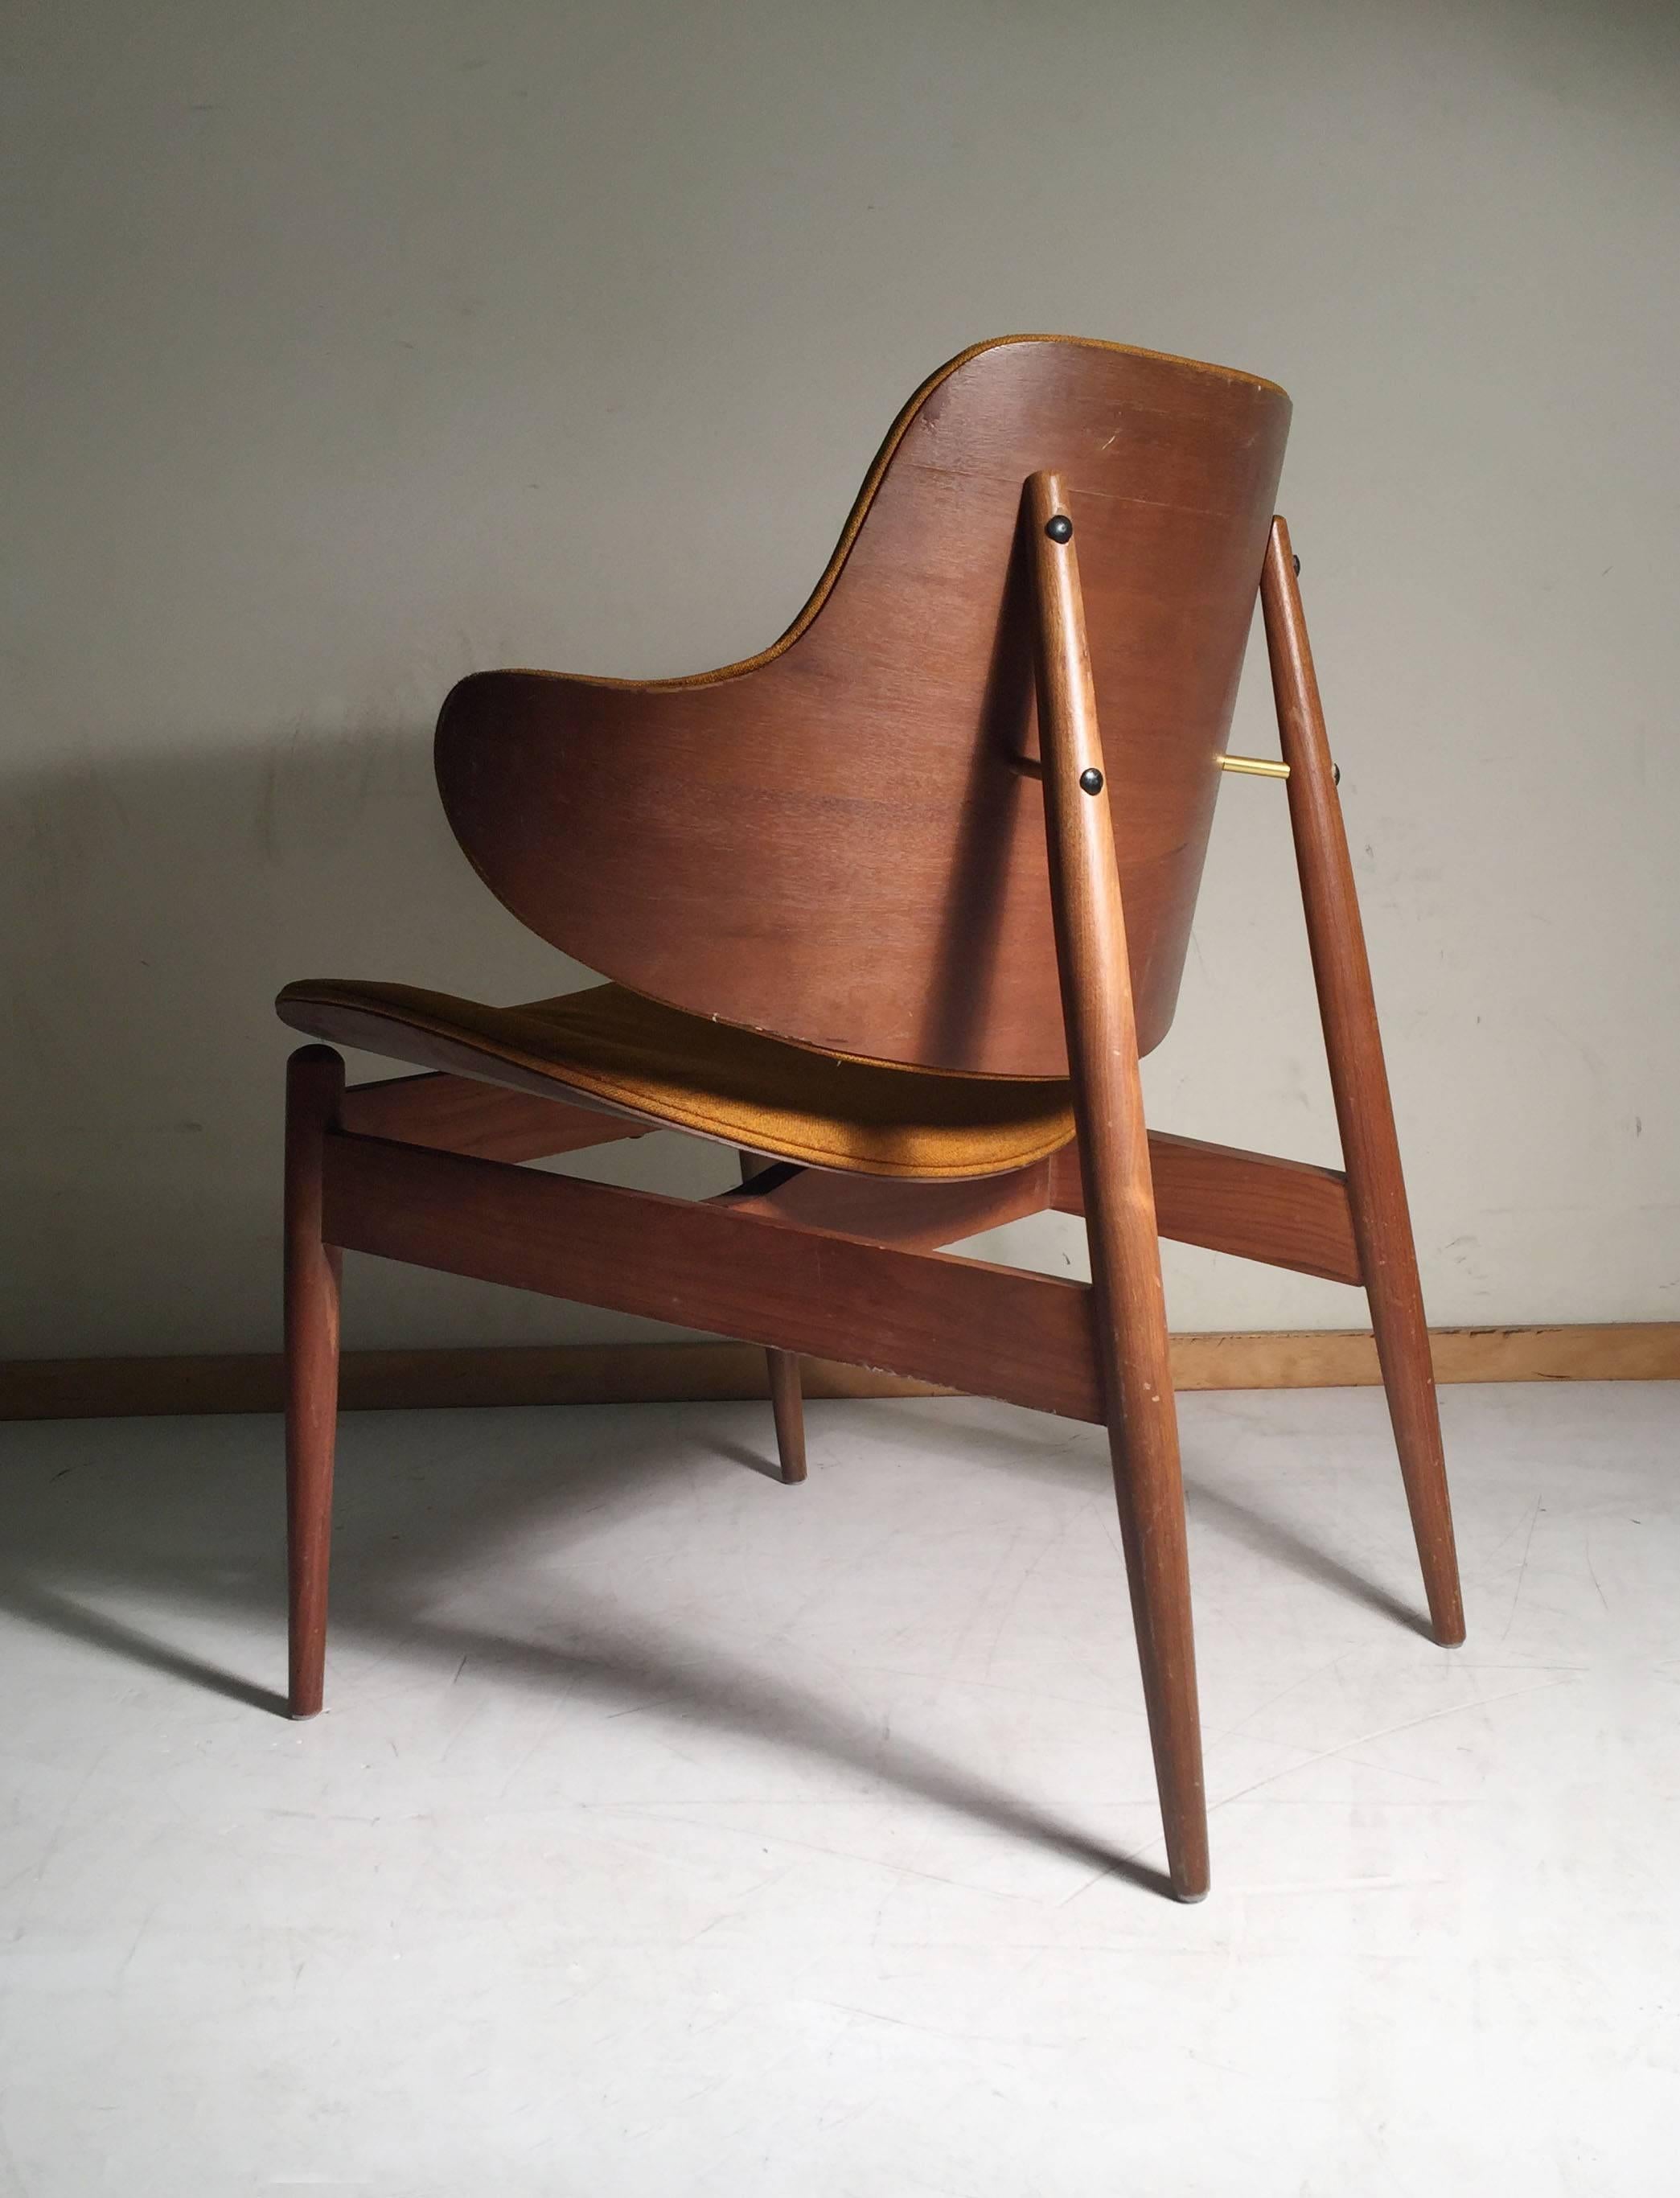 The most desirable form of the kodawood chairs. Clamshell back. Danish Modern, Kofod Larsen Adrian Pearsall style.

may need reupholstery.  fabric is loose as shown in photos and some dingy spots. Maybe will clean up but best to purchase with the